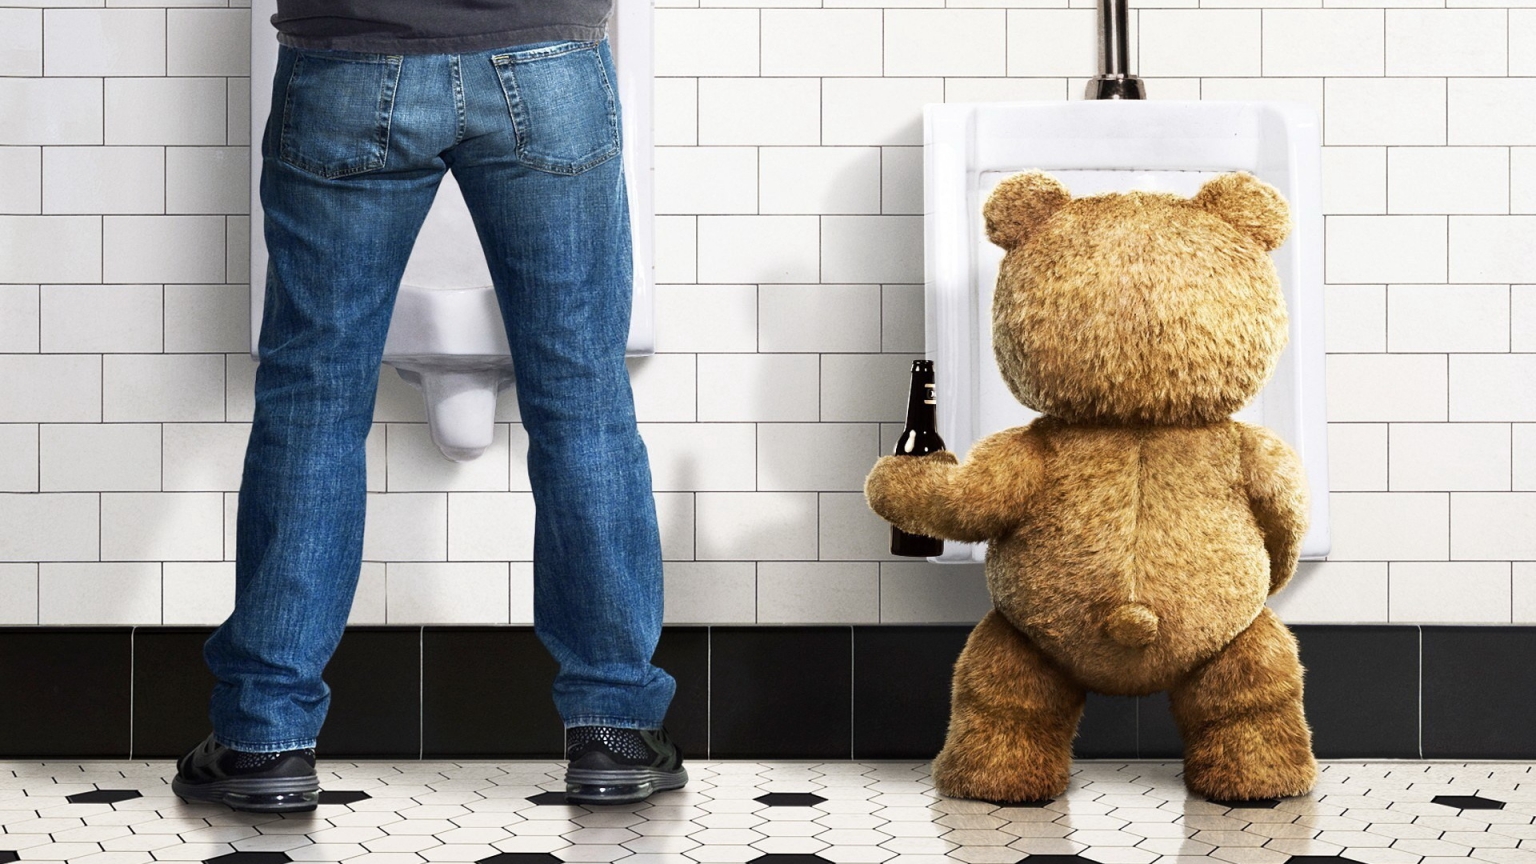 Ted Movie for 1536 x 864 HDTV resolution